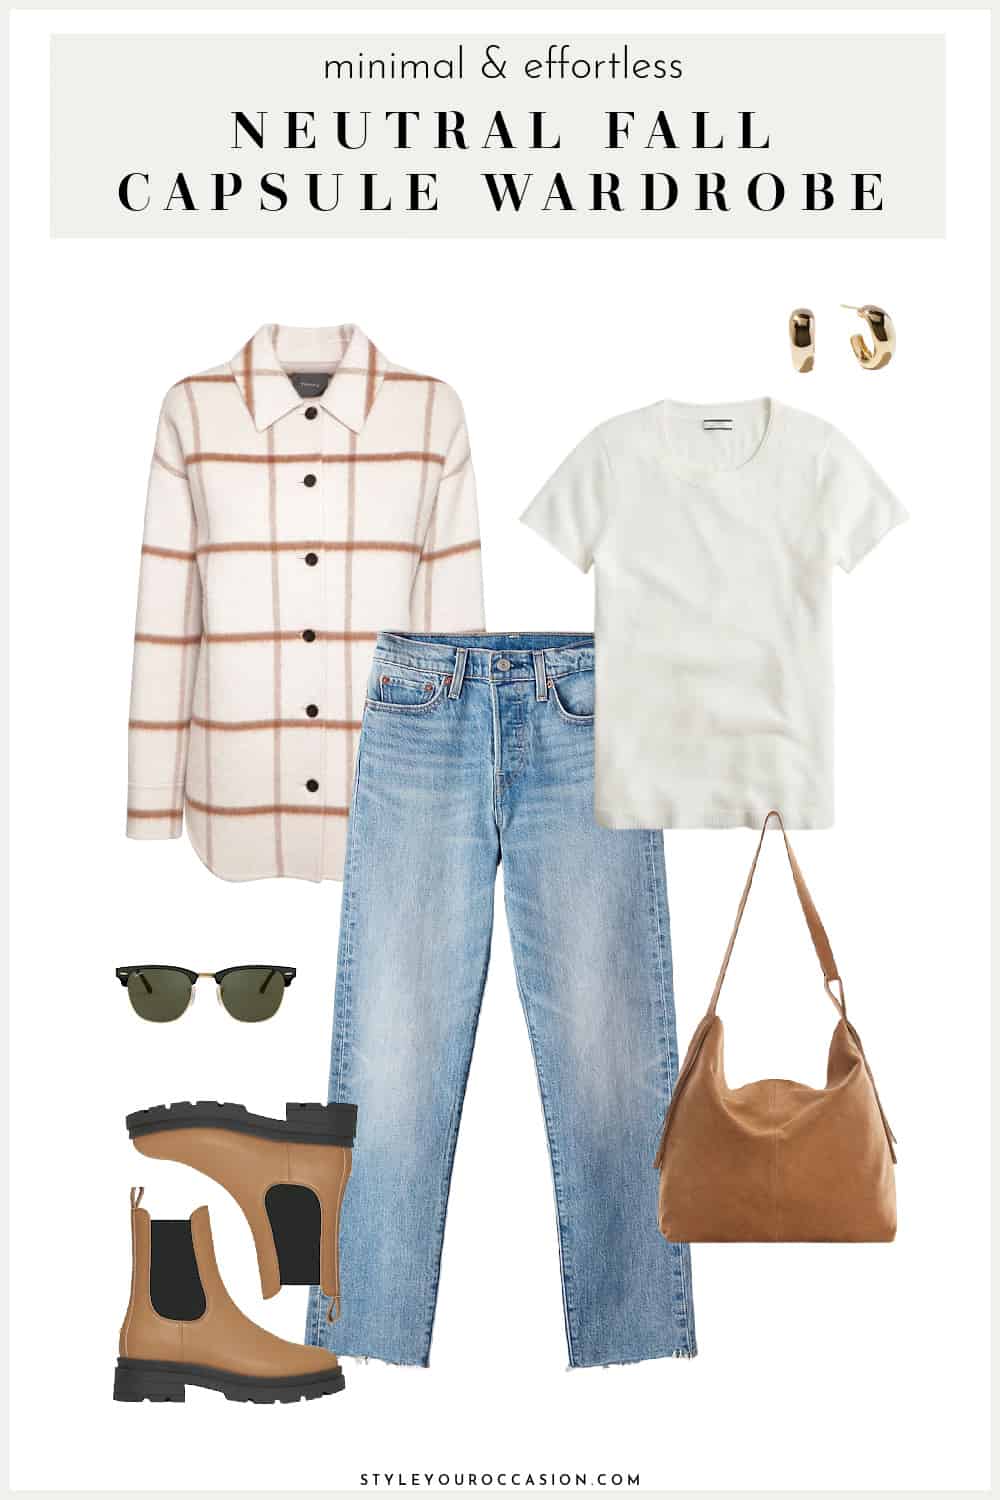 graphic of an outfit with a plaid shirt jacket, ivory tee, jeans, and brown lug boots with a brown suede bag for a fall capsule wardrobe